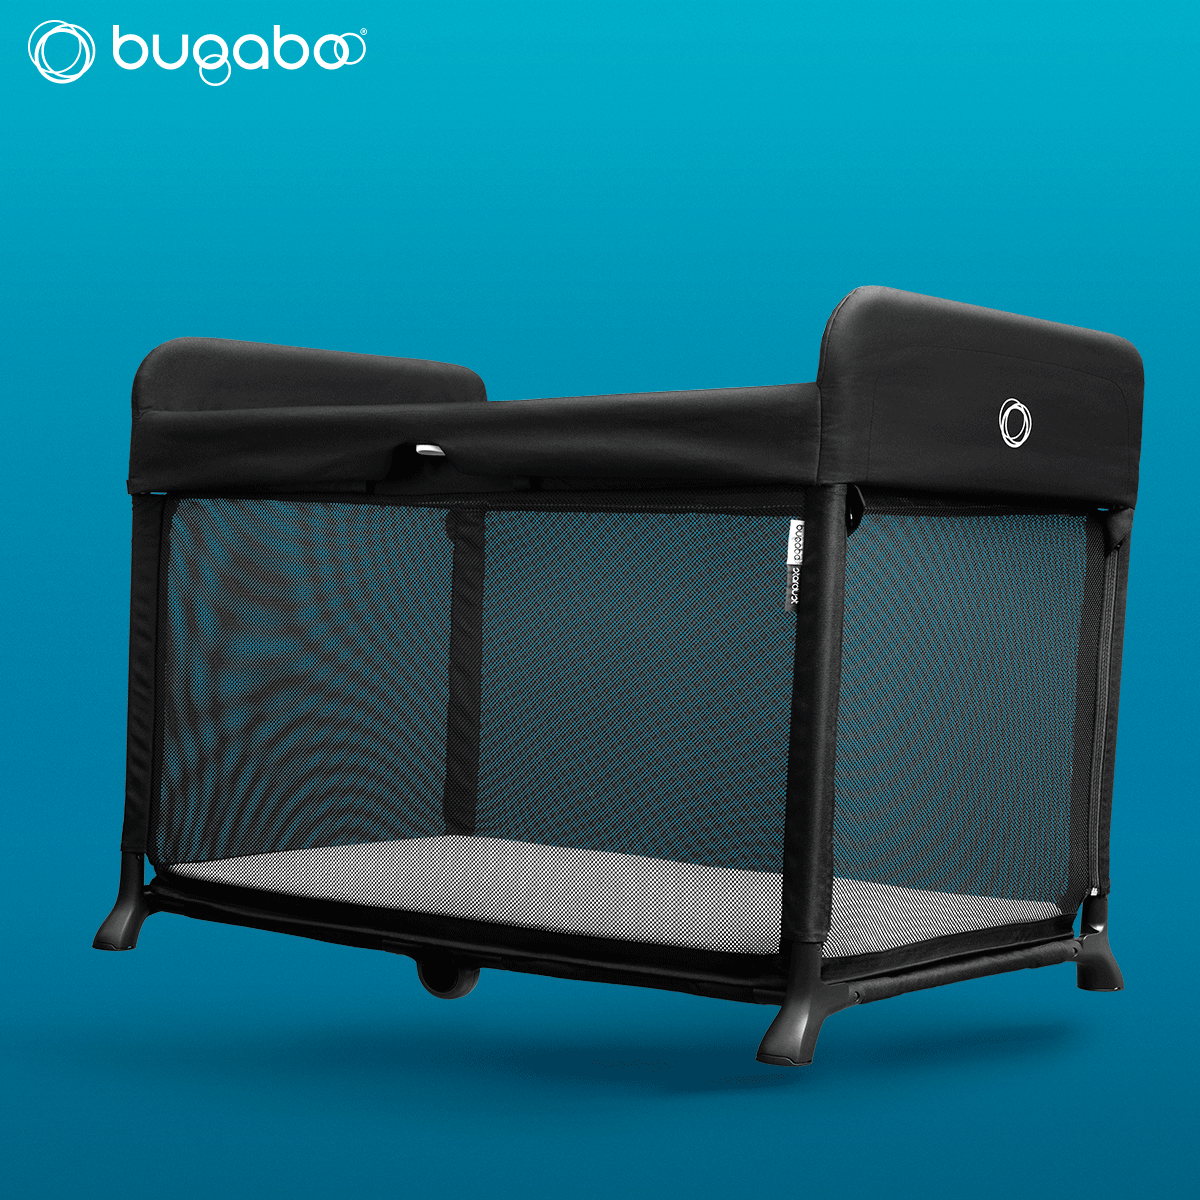 Animated gif of the Bugaboo Stardust unfolding on a blue background.